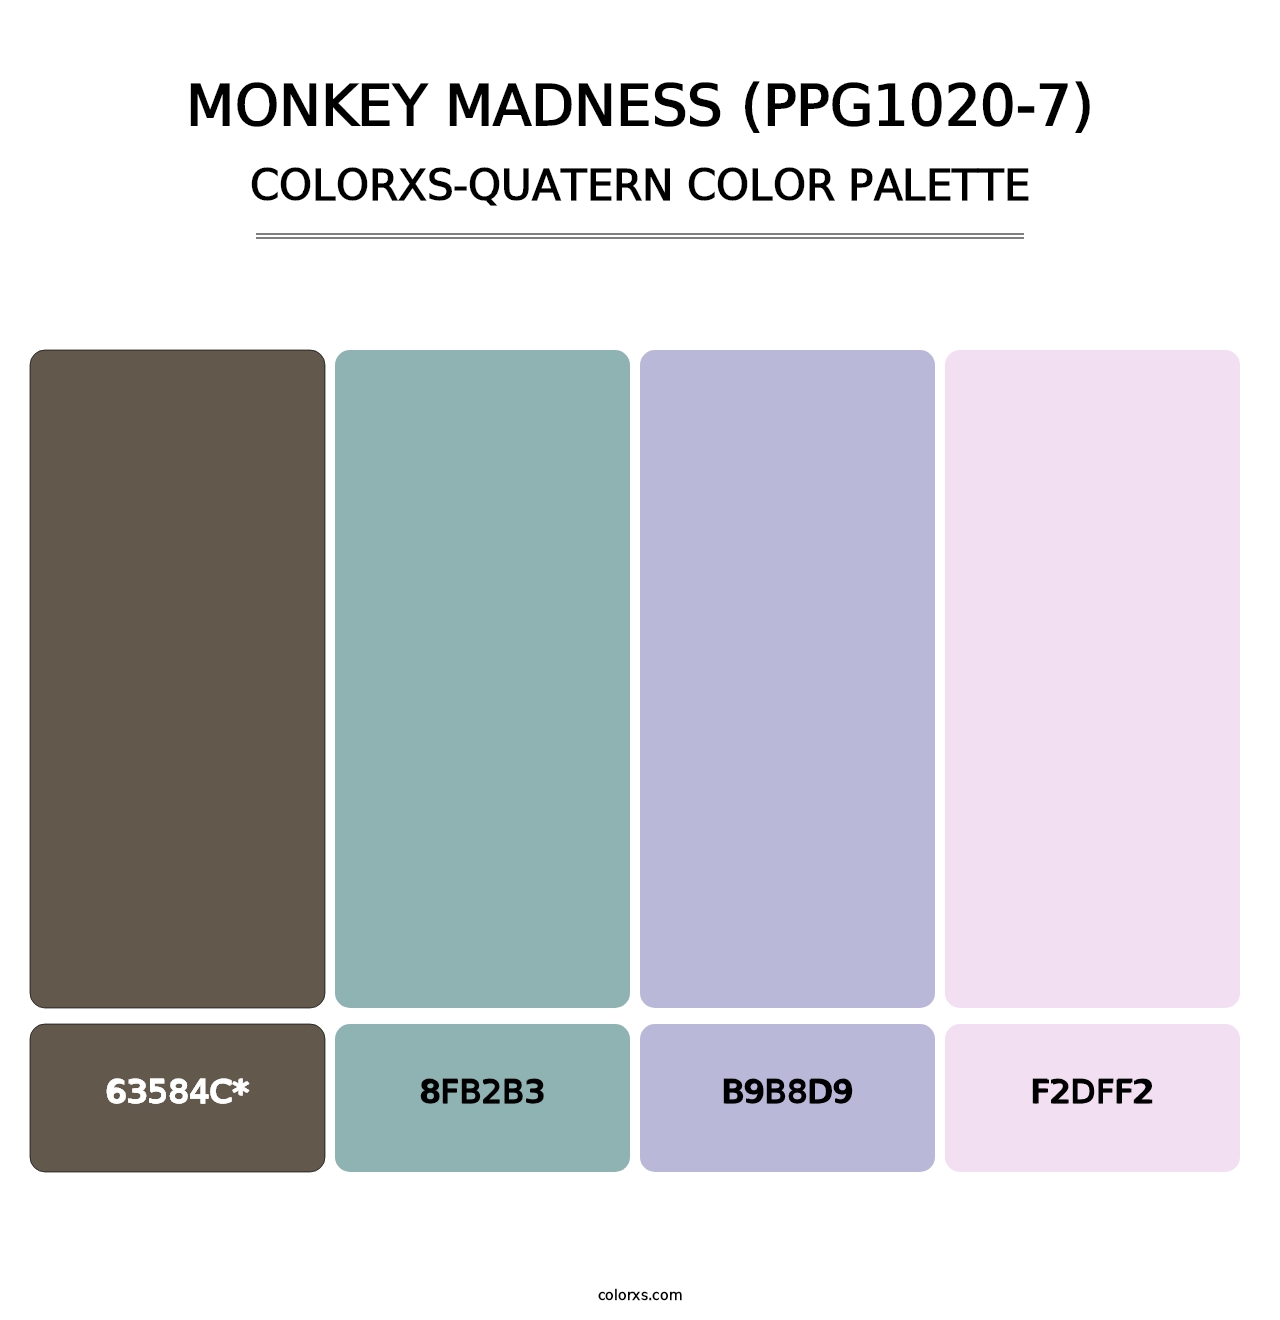 Monkey Madness (PPG1020-7) - Colorxs Quatern Palette